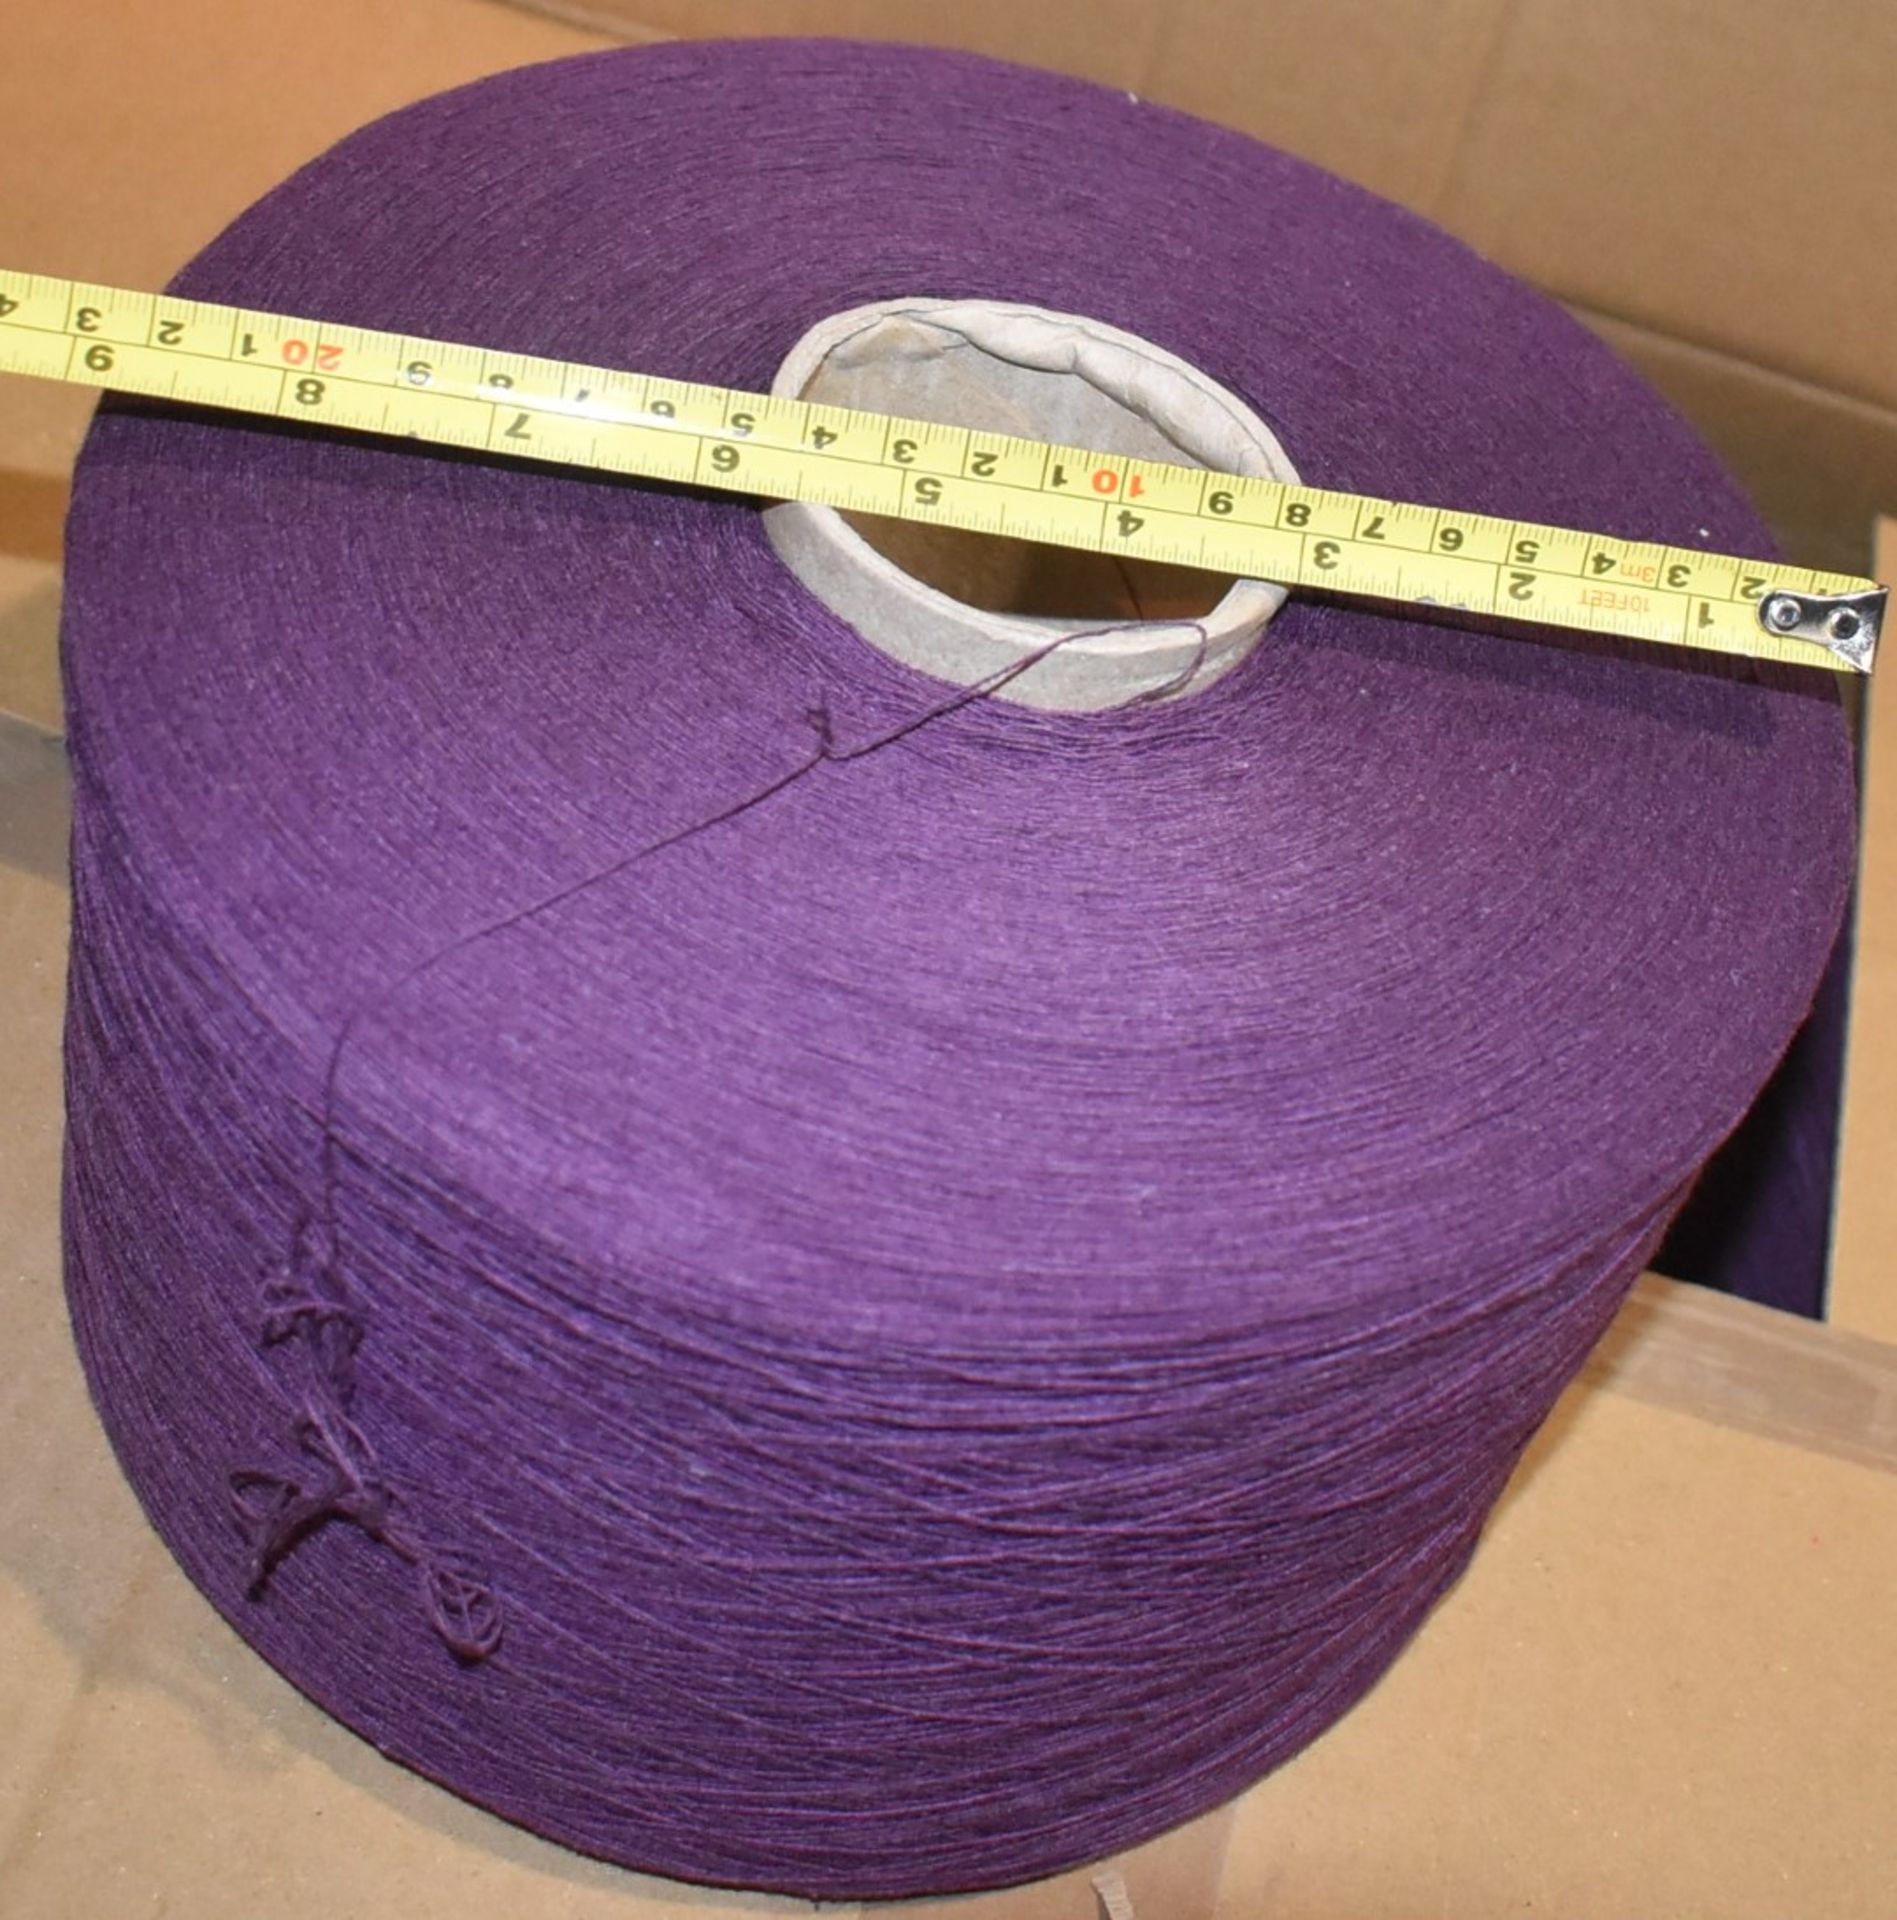 1 x Cone of 1/13 MicroCotton Knitting Yarn - Purple - Approx Weight: 2,300g - New Stock ABL Yarn - Image 6 of 10